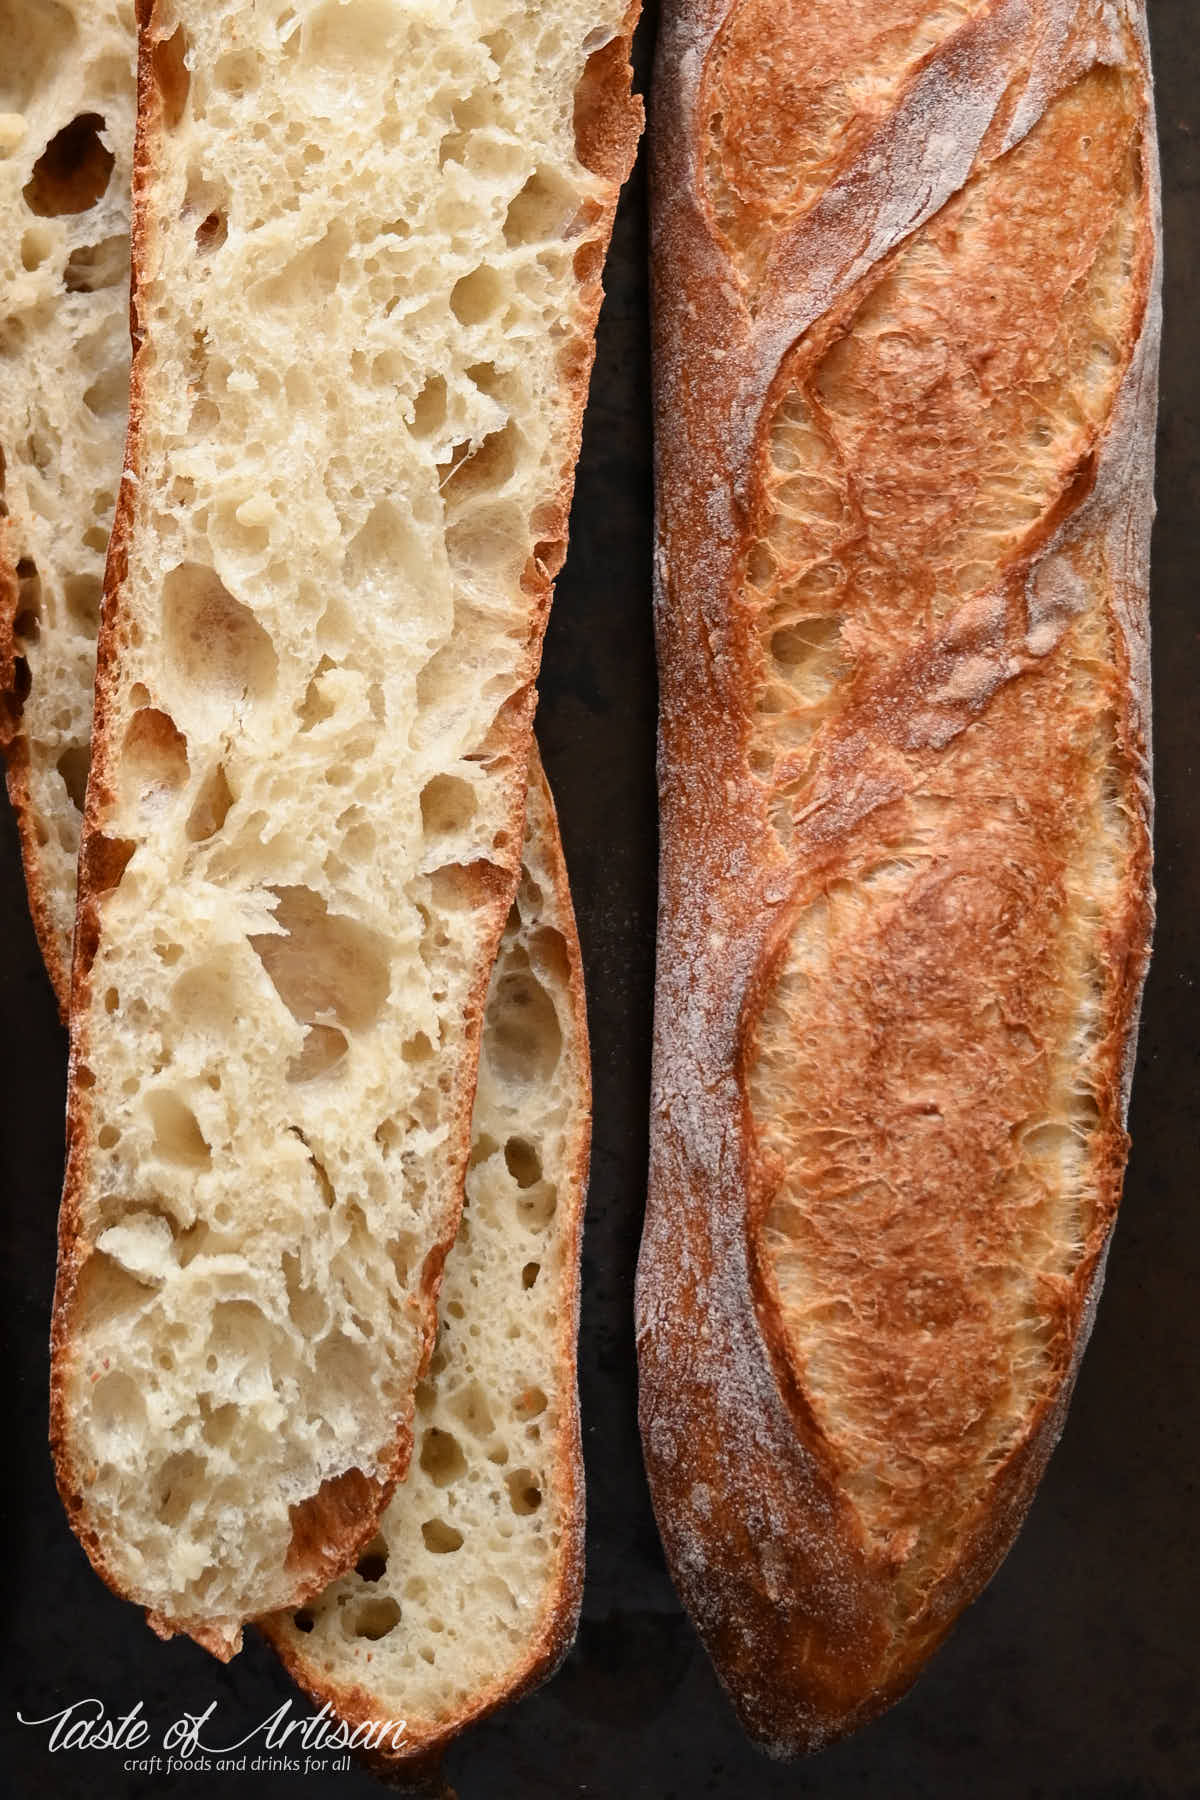 Close up of French baguette crumbs and crispy crust.